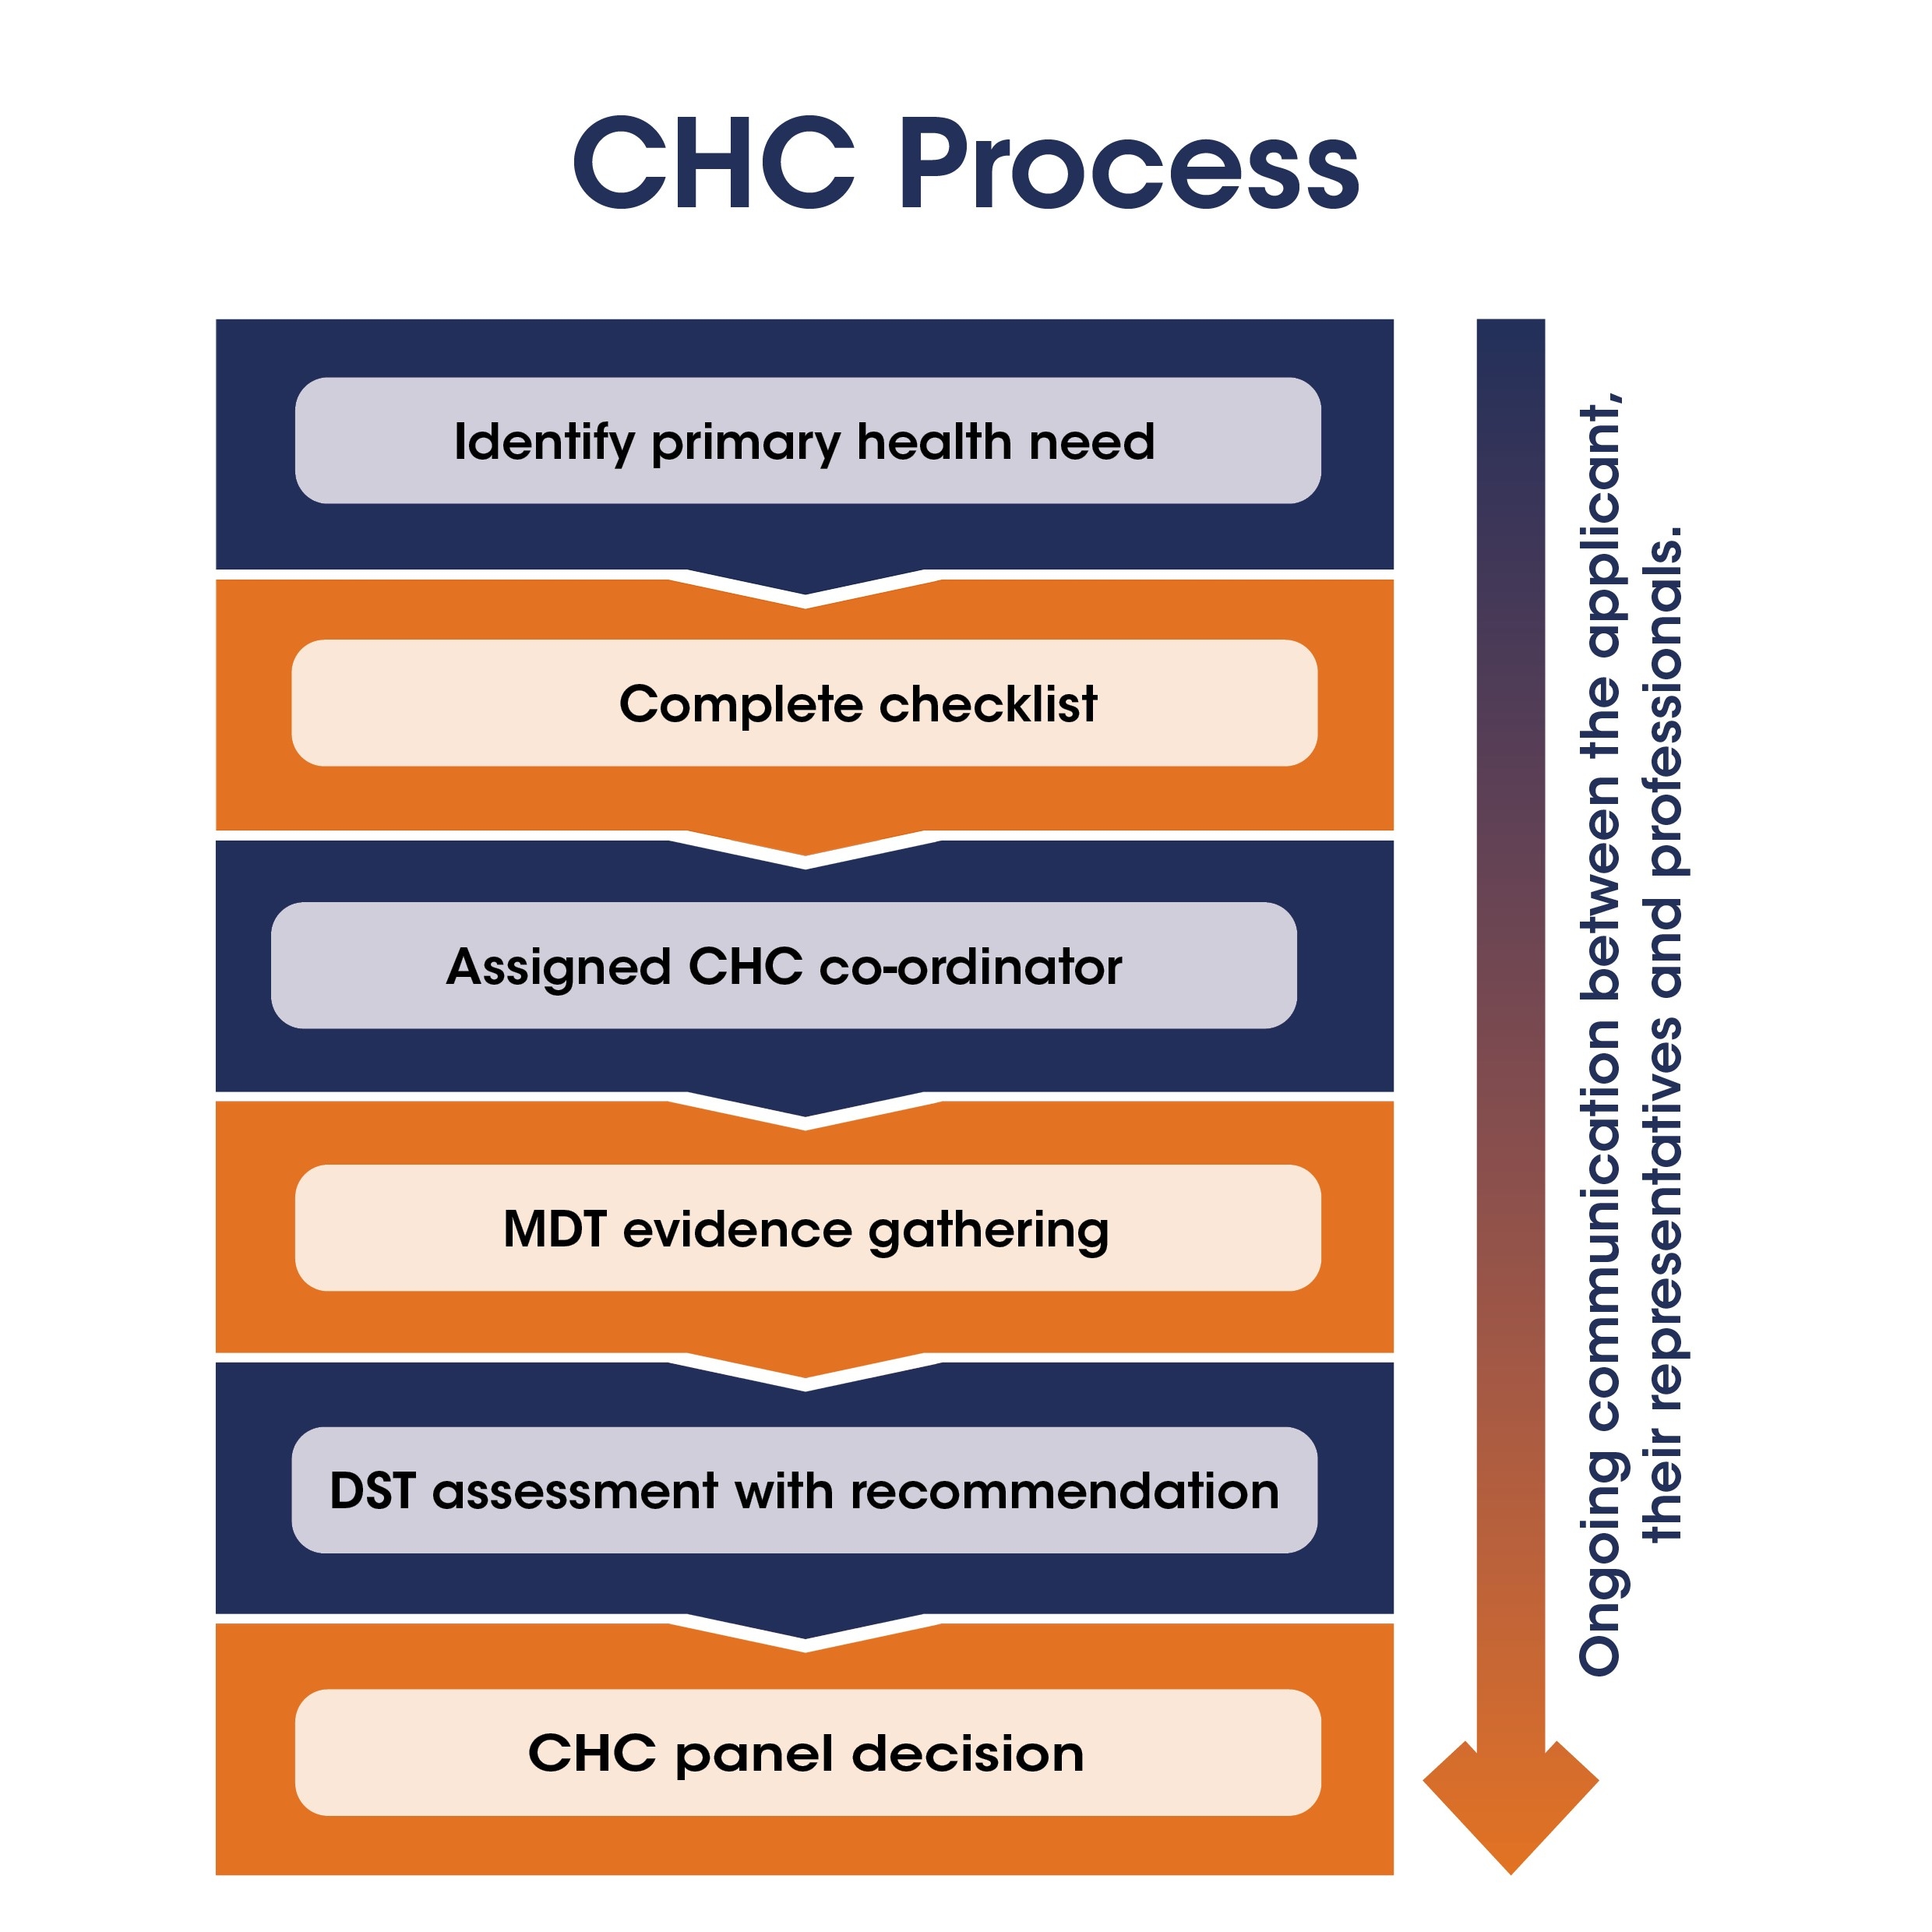 A flow chart of the CHC process